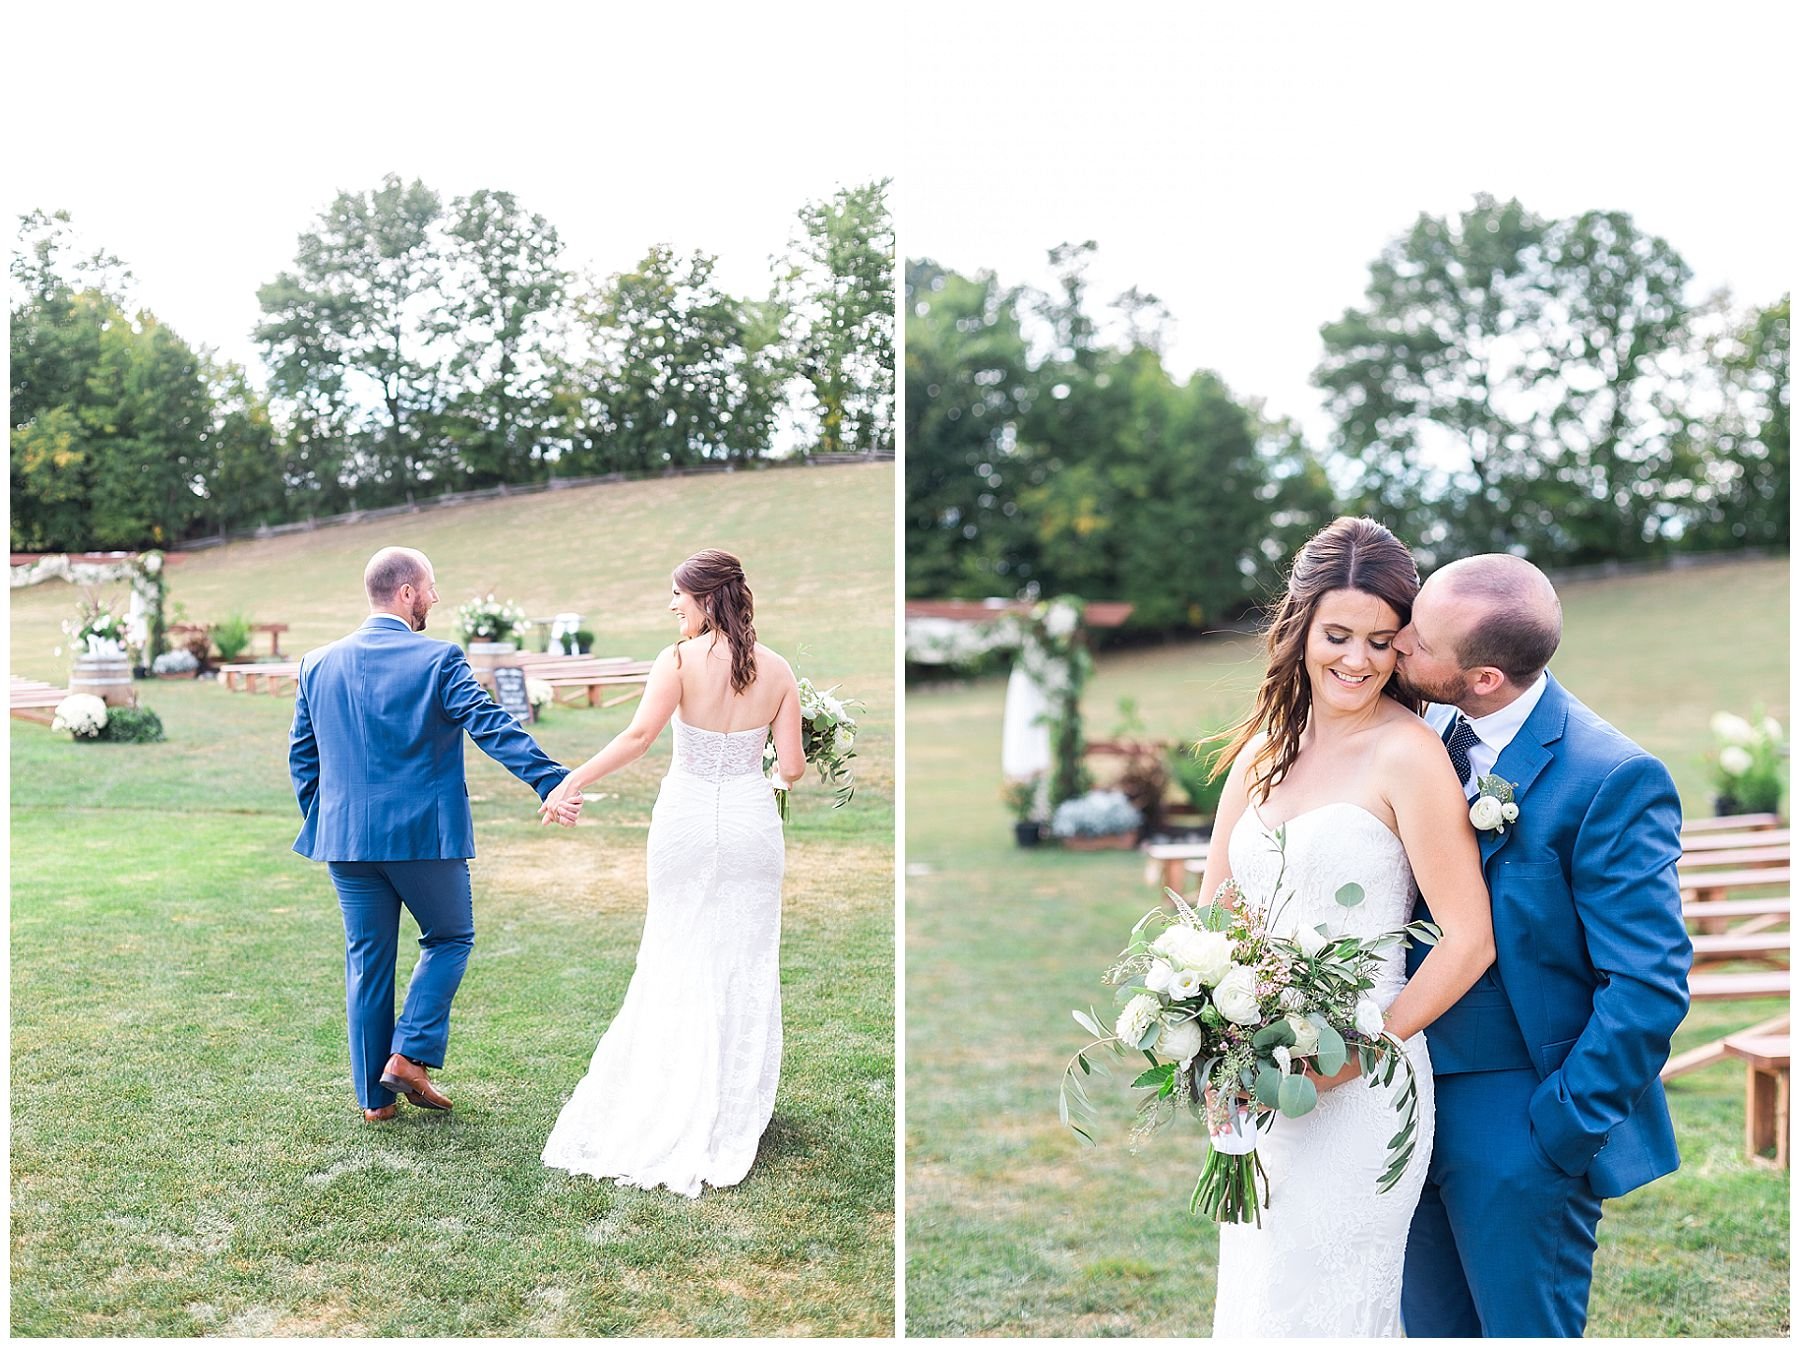 Rustic chic wedding at the Meadows catering